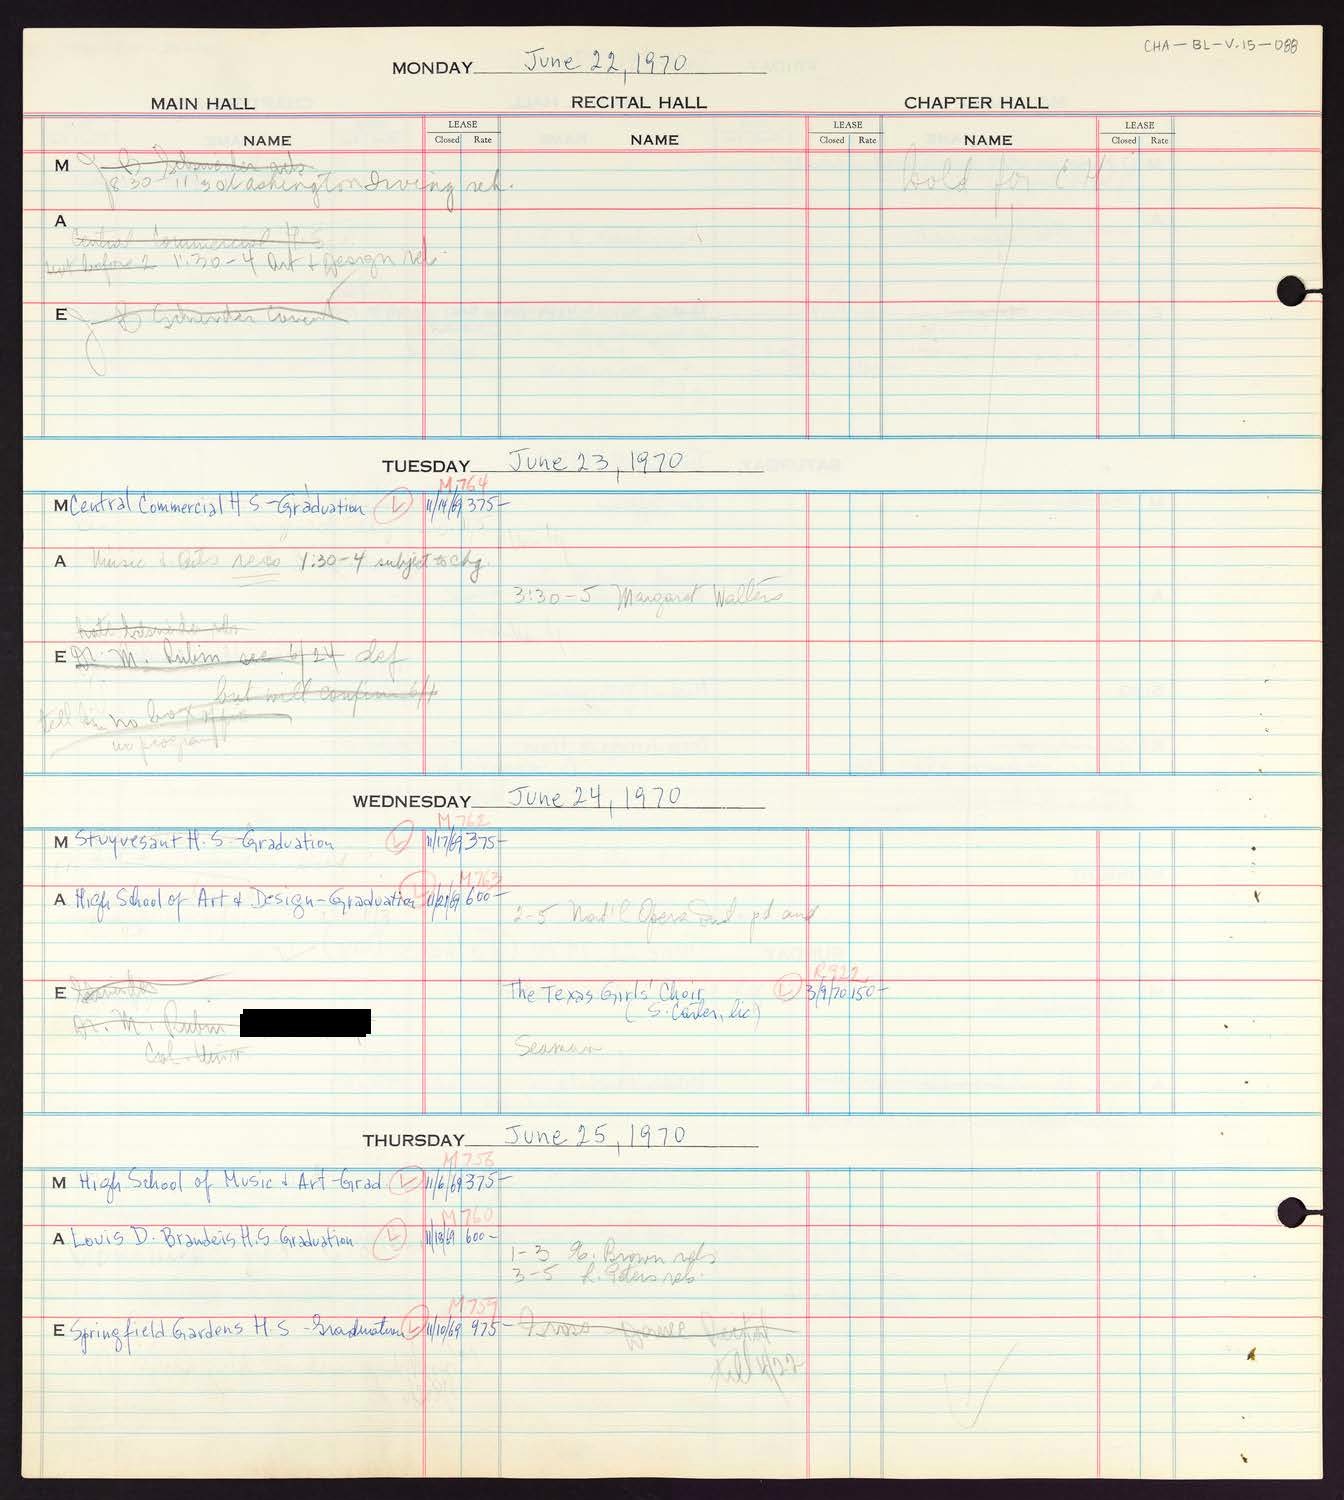 Carnegie Hall Booking Ledger, volume 15, page 88